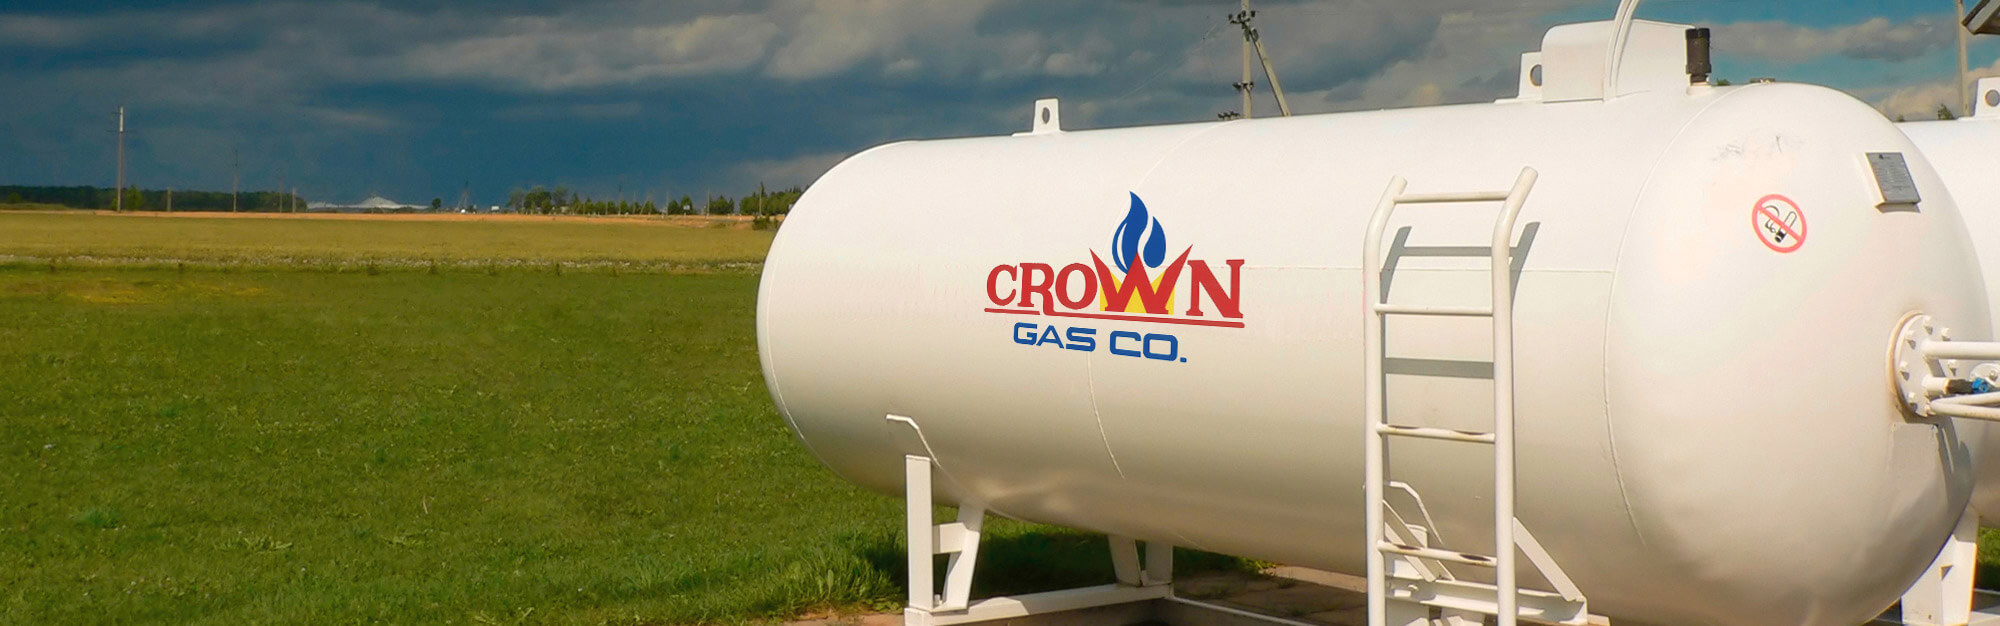 Two large, white propane tanks in the foreground with a field in the background